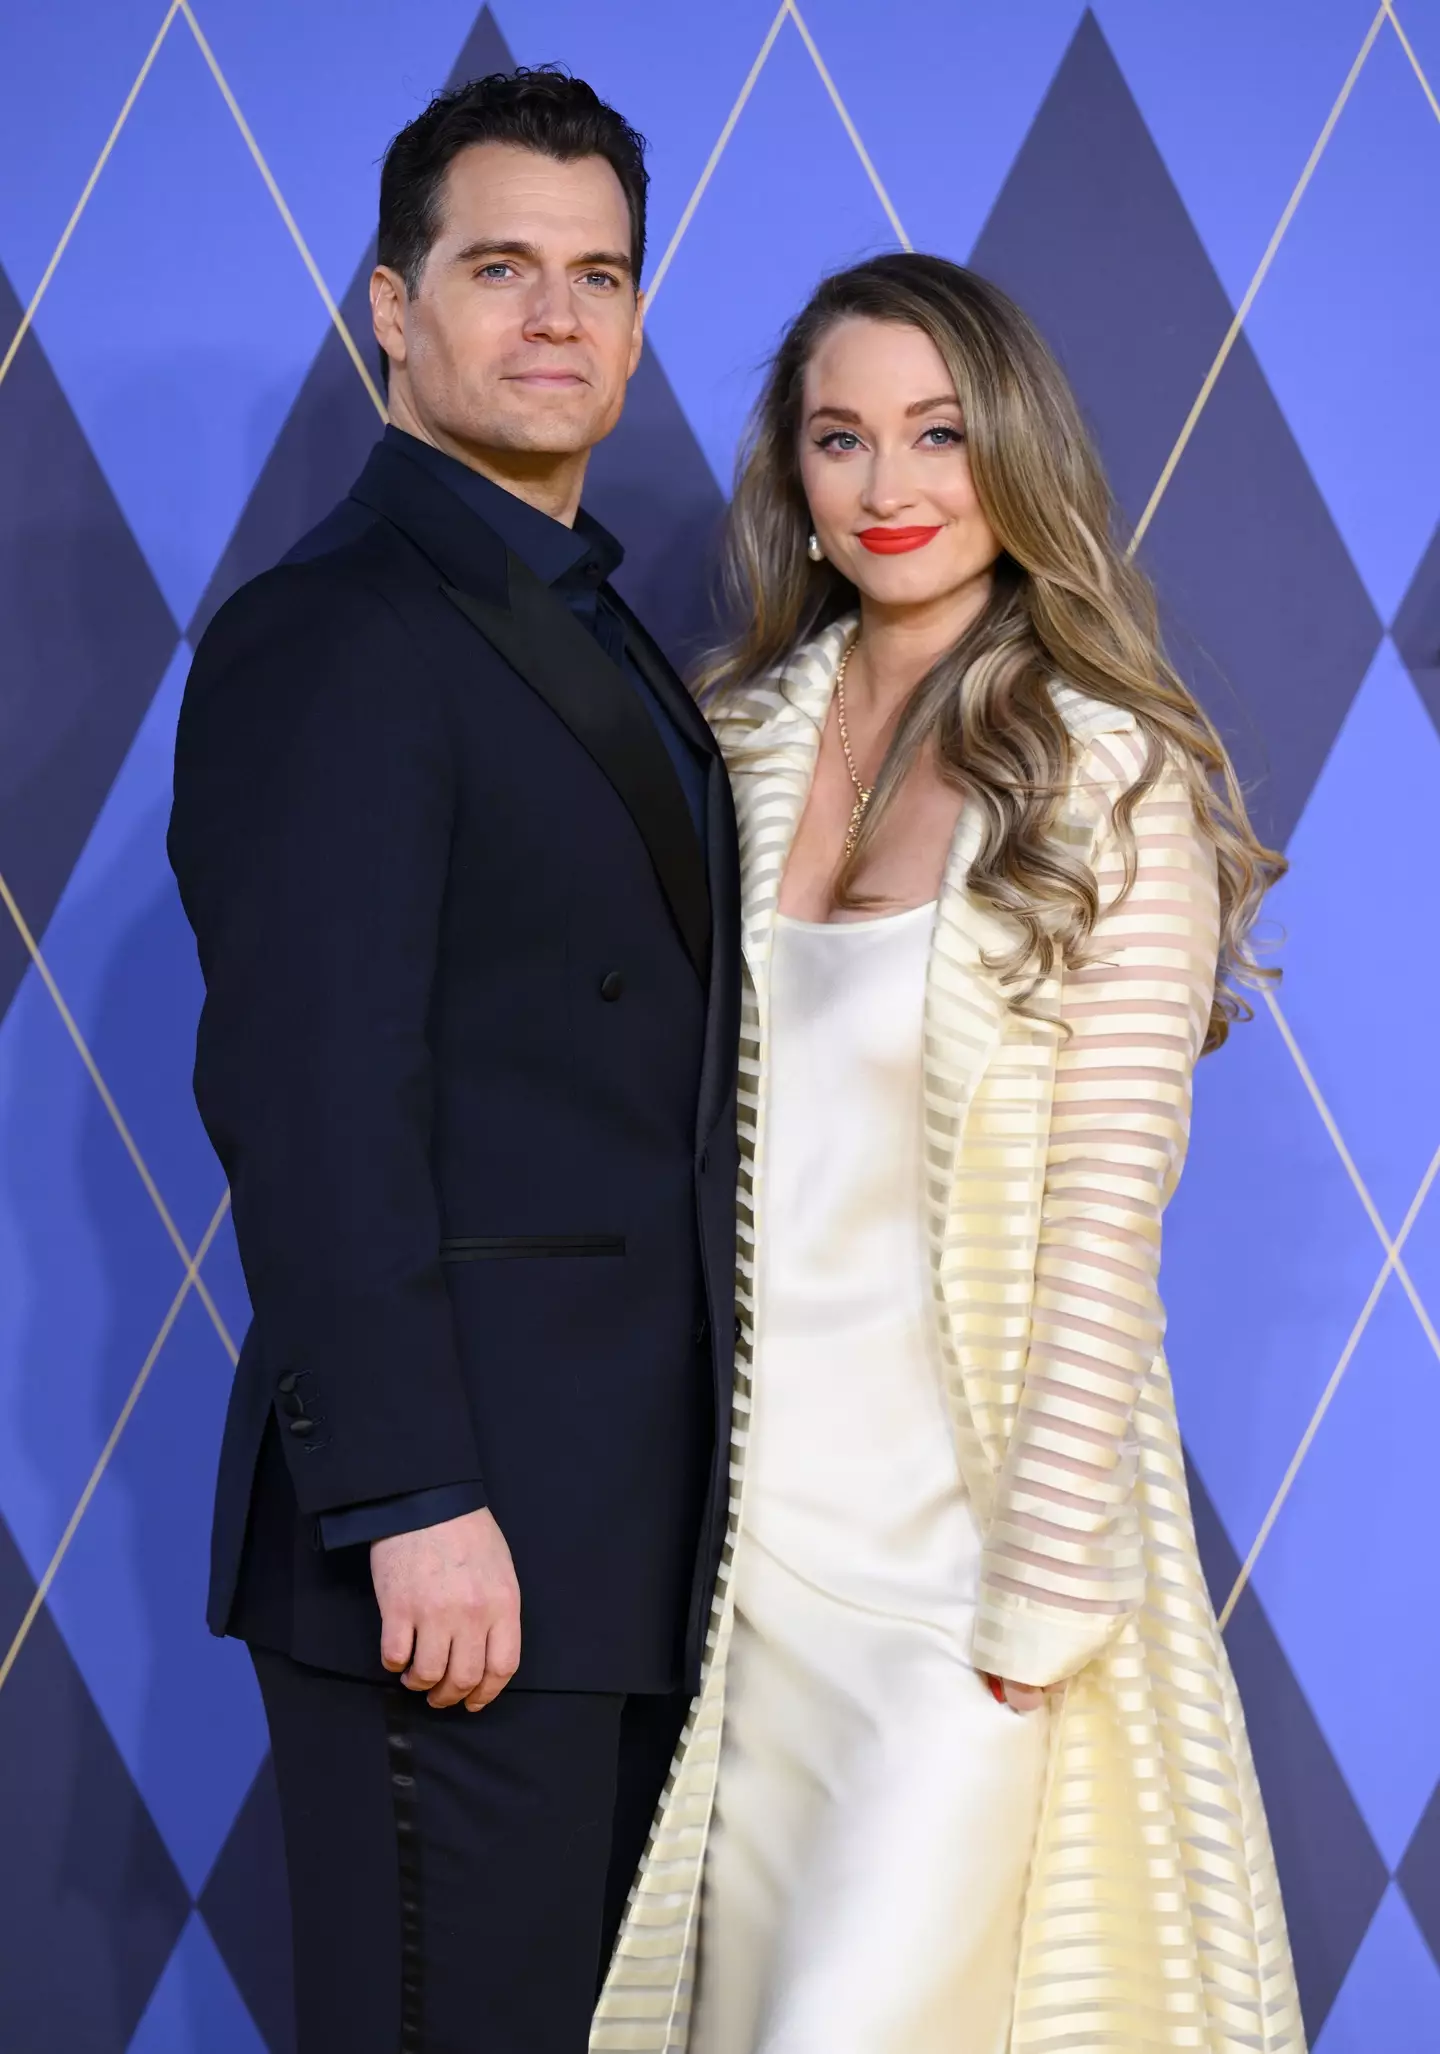 Henry Cavill and his girlfriend Natalie Viscuso are expecting a baby. (Karwai Tang/WireImage)